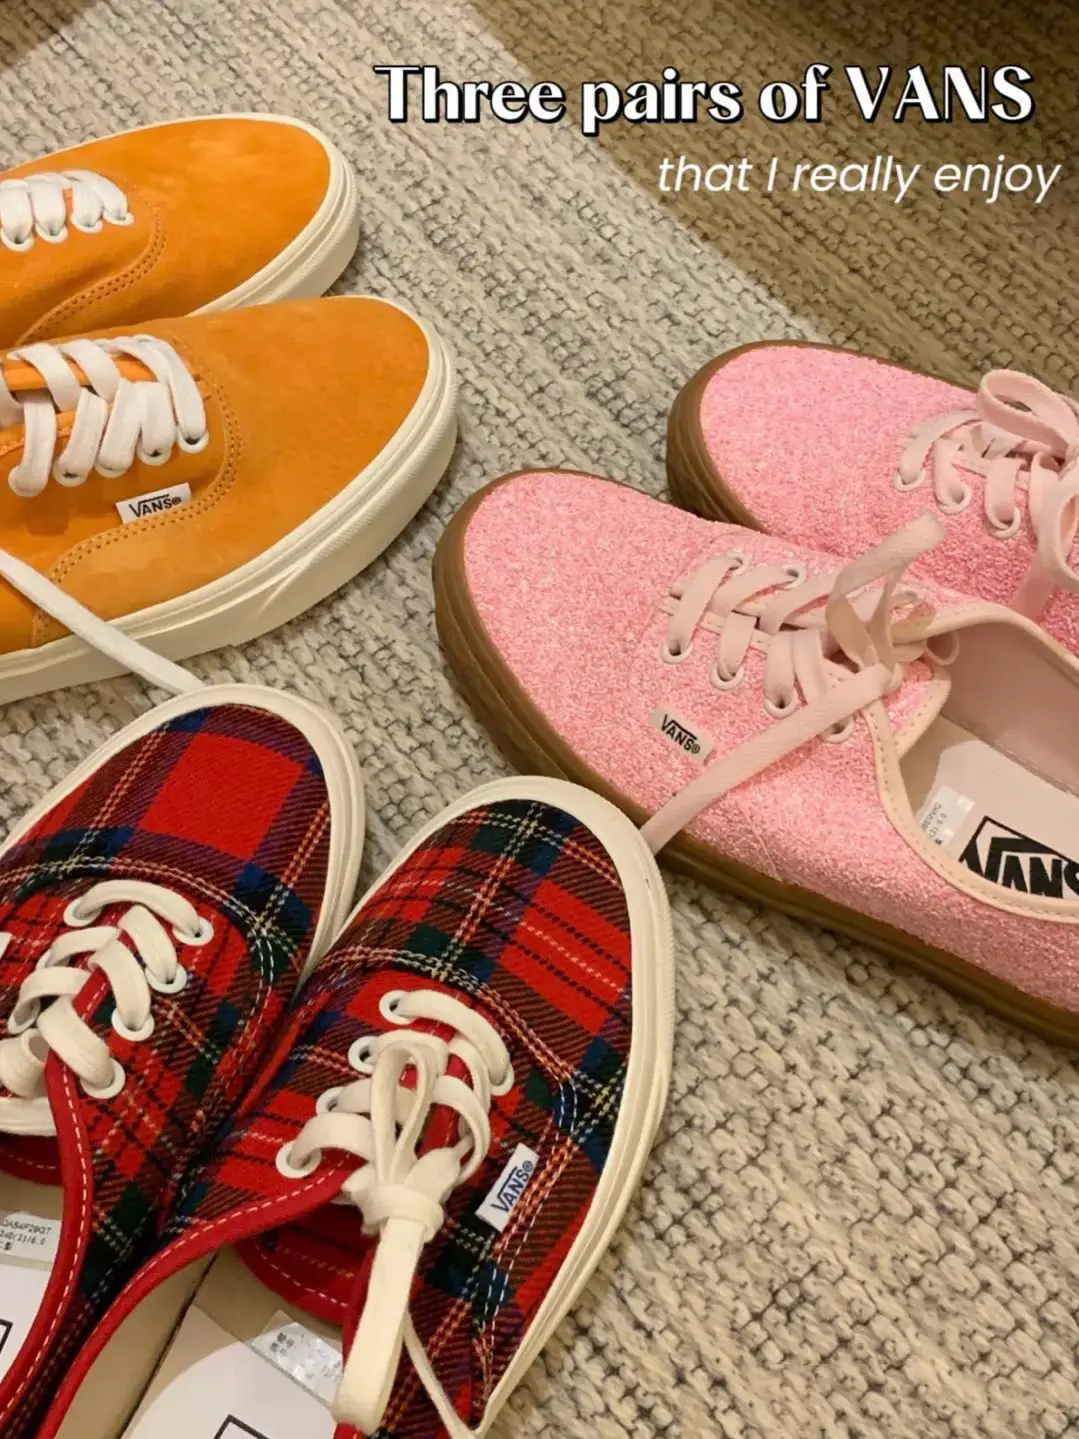 3 pairs of vans that I really enjoy🫶🏻 | Gallery posted by Oliviawardrobe  | Lemon8